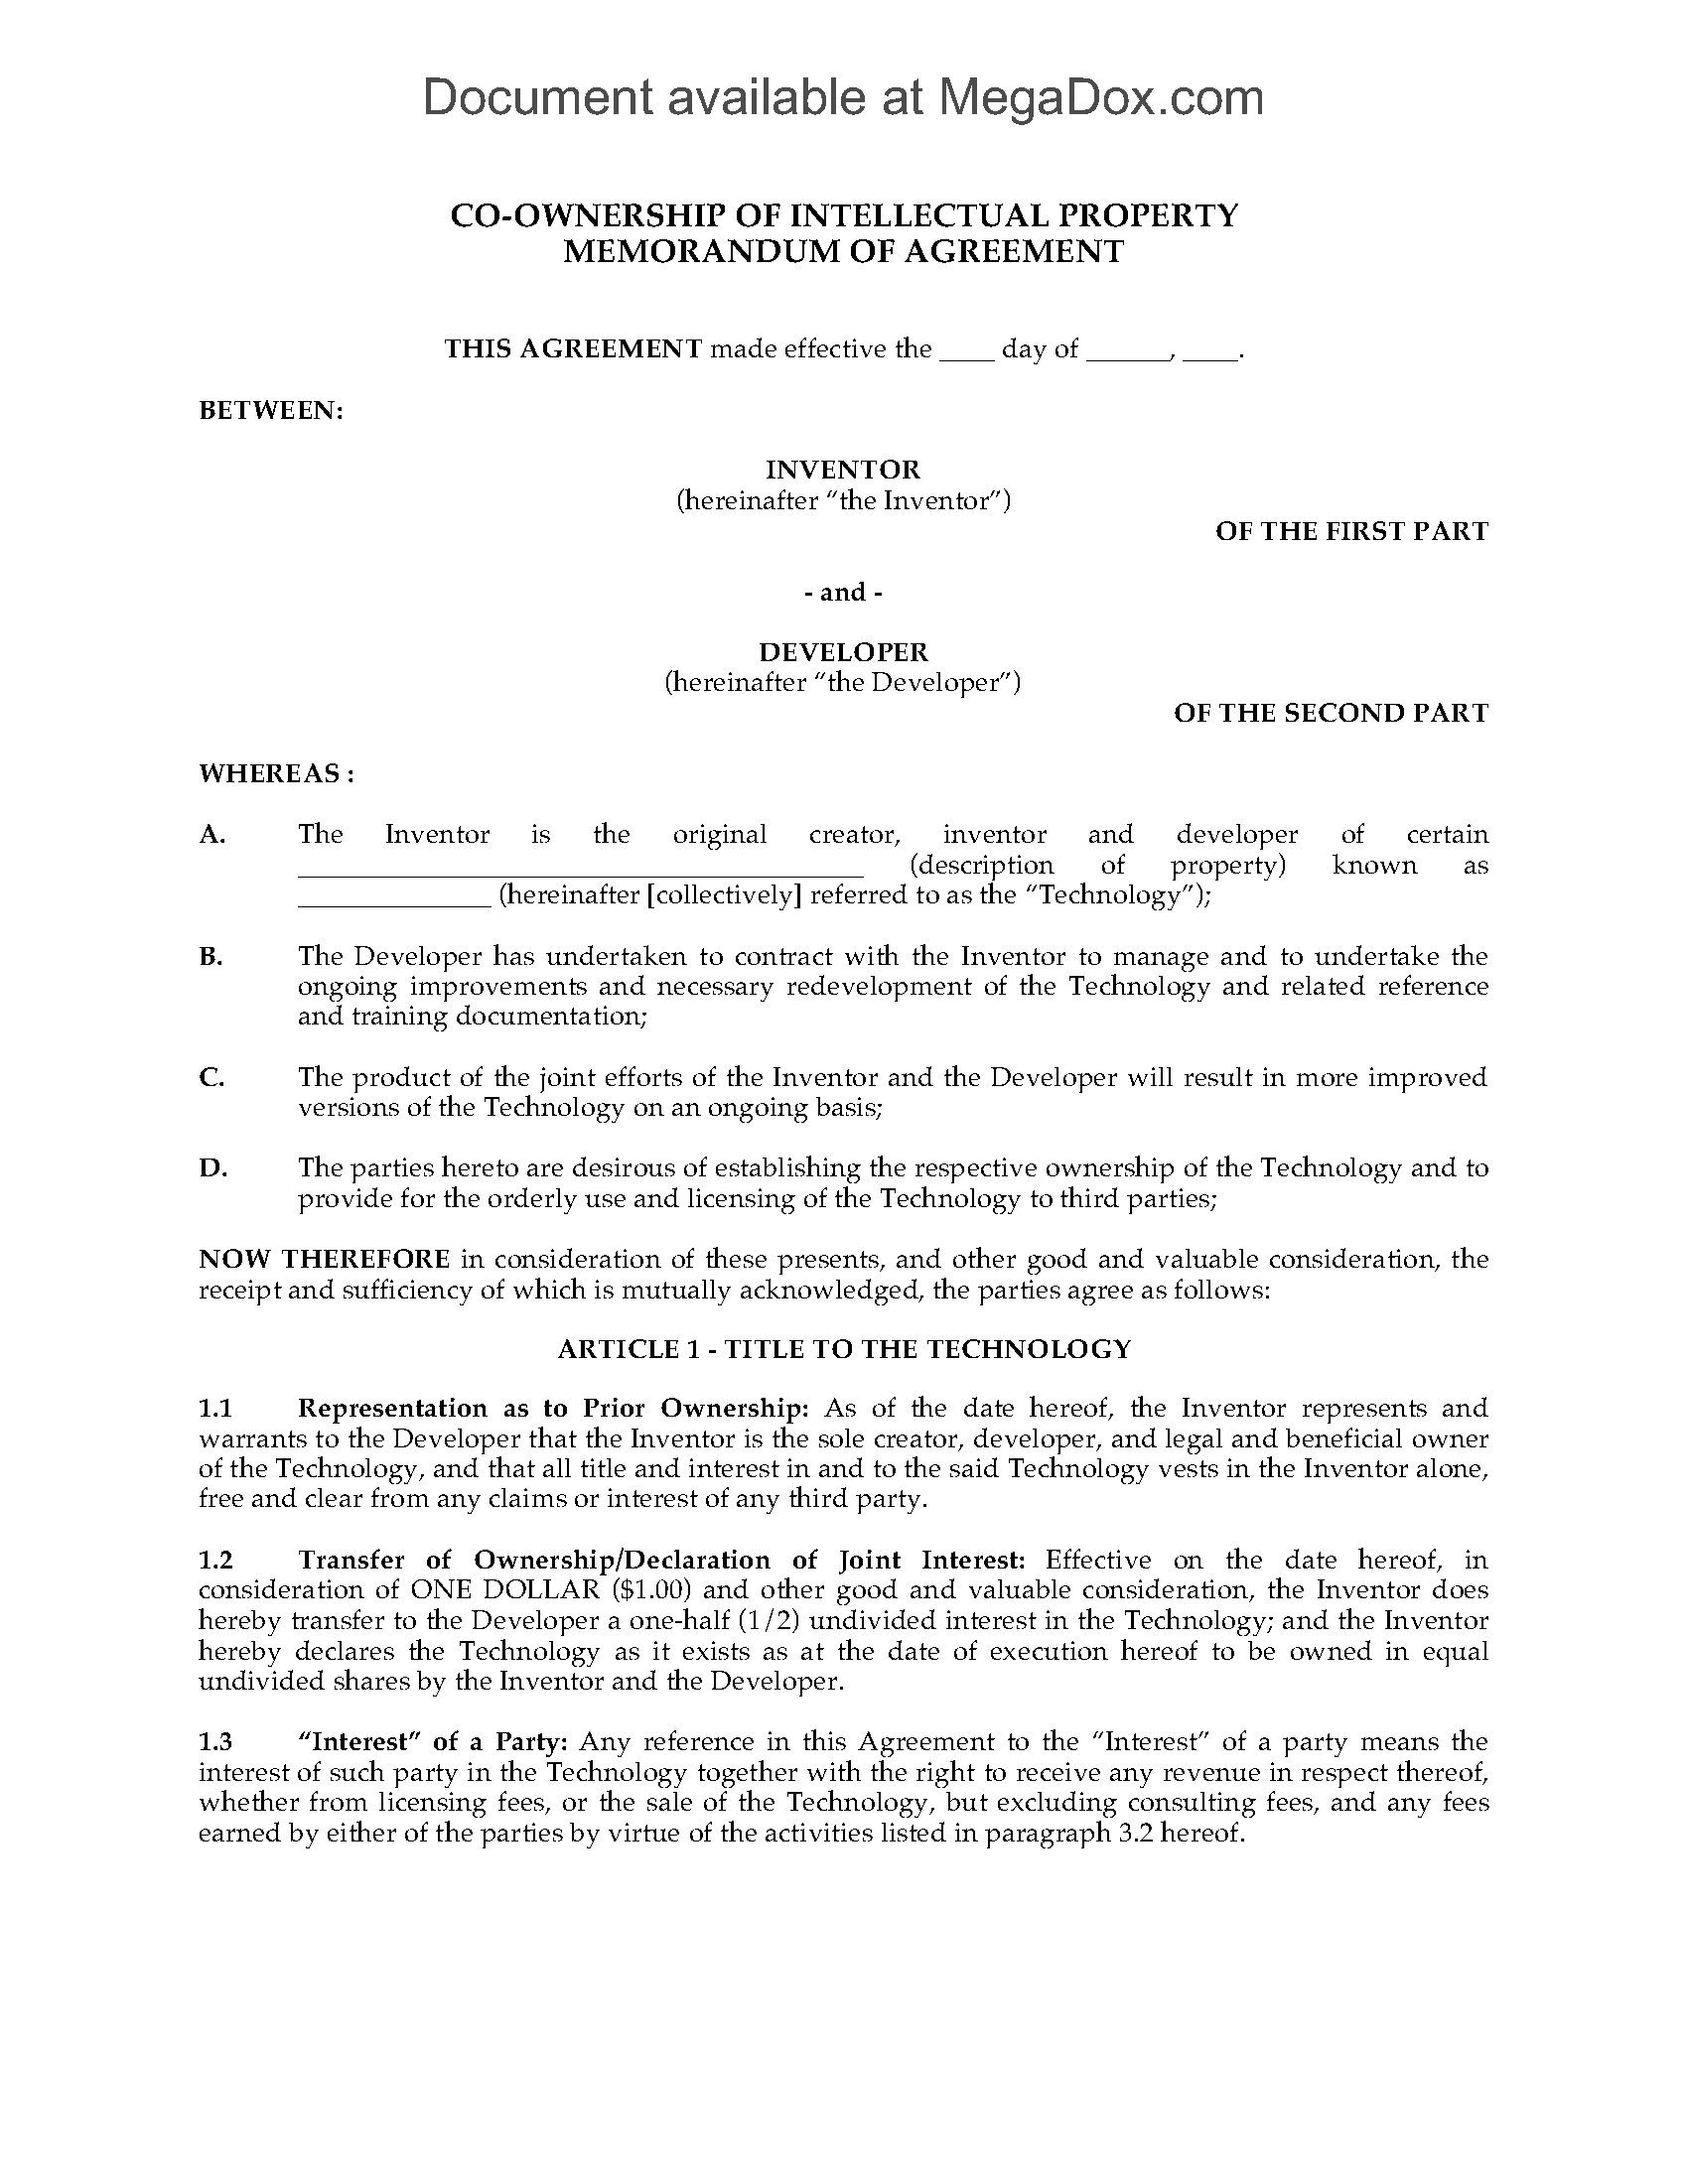 Transfer Of Ownership Agreement Co Ownership Agreement for Intellectual Property